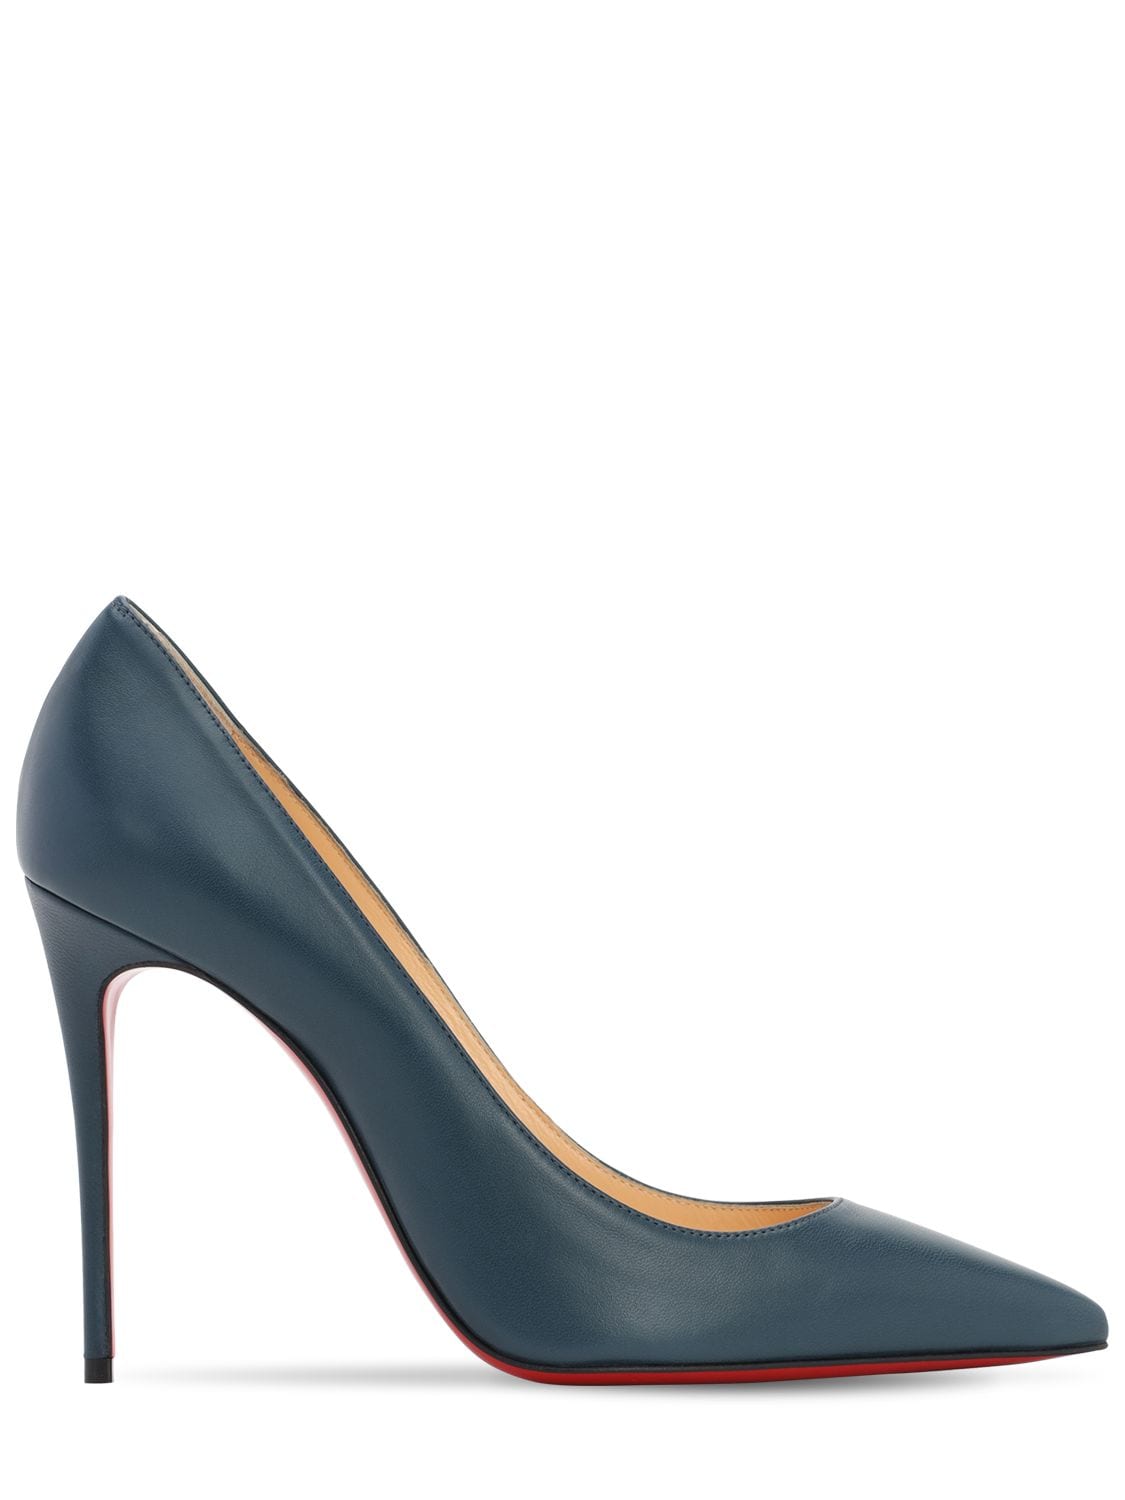 Christian Louboutin 100mm Kate Leather Pumps In Navy